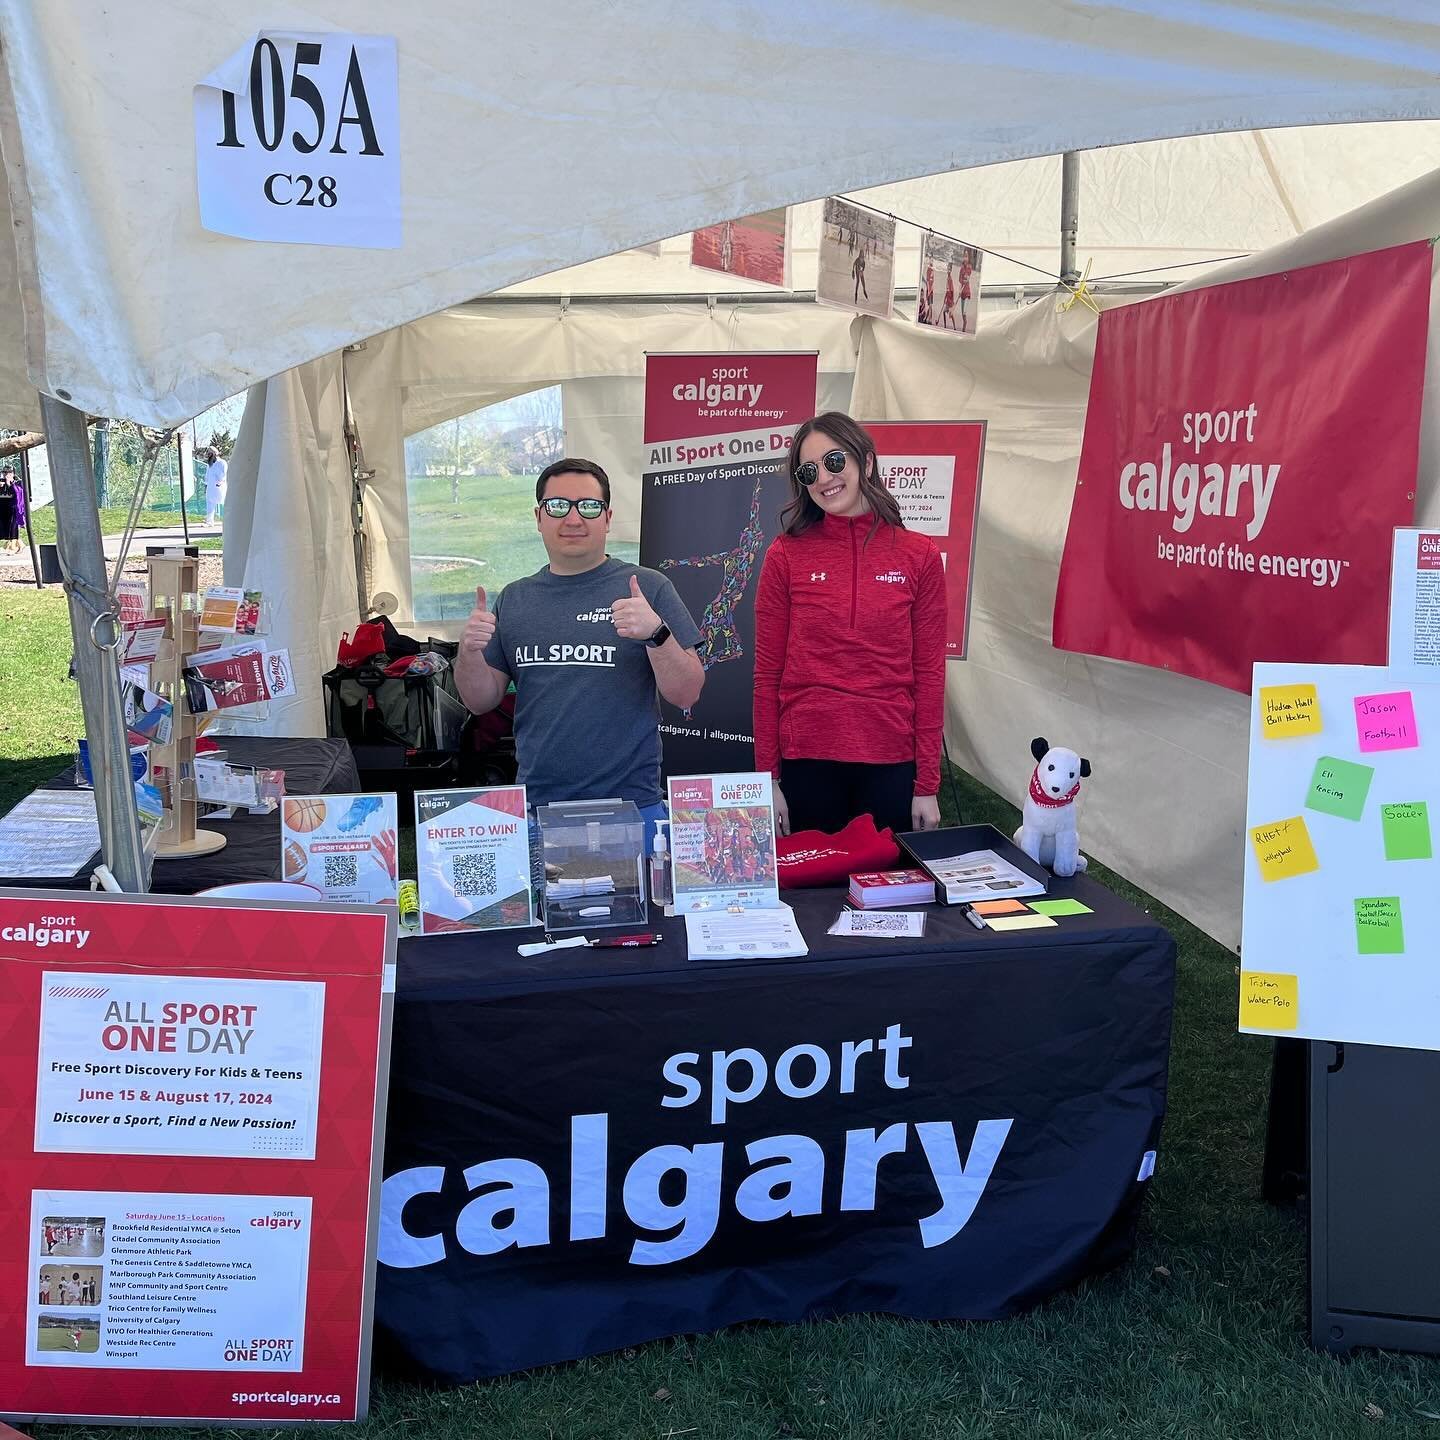 We are setup at Nagar Kirtan in Prairie Winds Park today telling everyone about All Sport One Day happening June 15th. Come by and say hello and play some games we have setup, we&rsquo;re also hosting a contest to win two tickets to the @calgarysurge